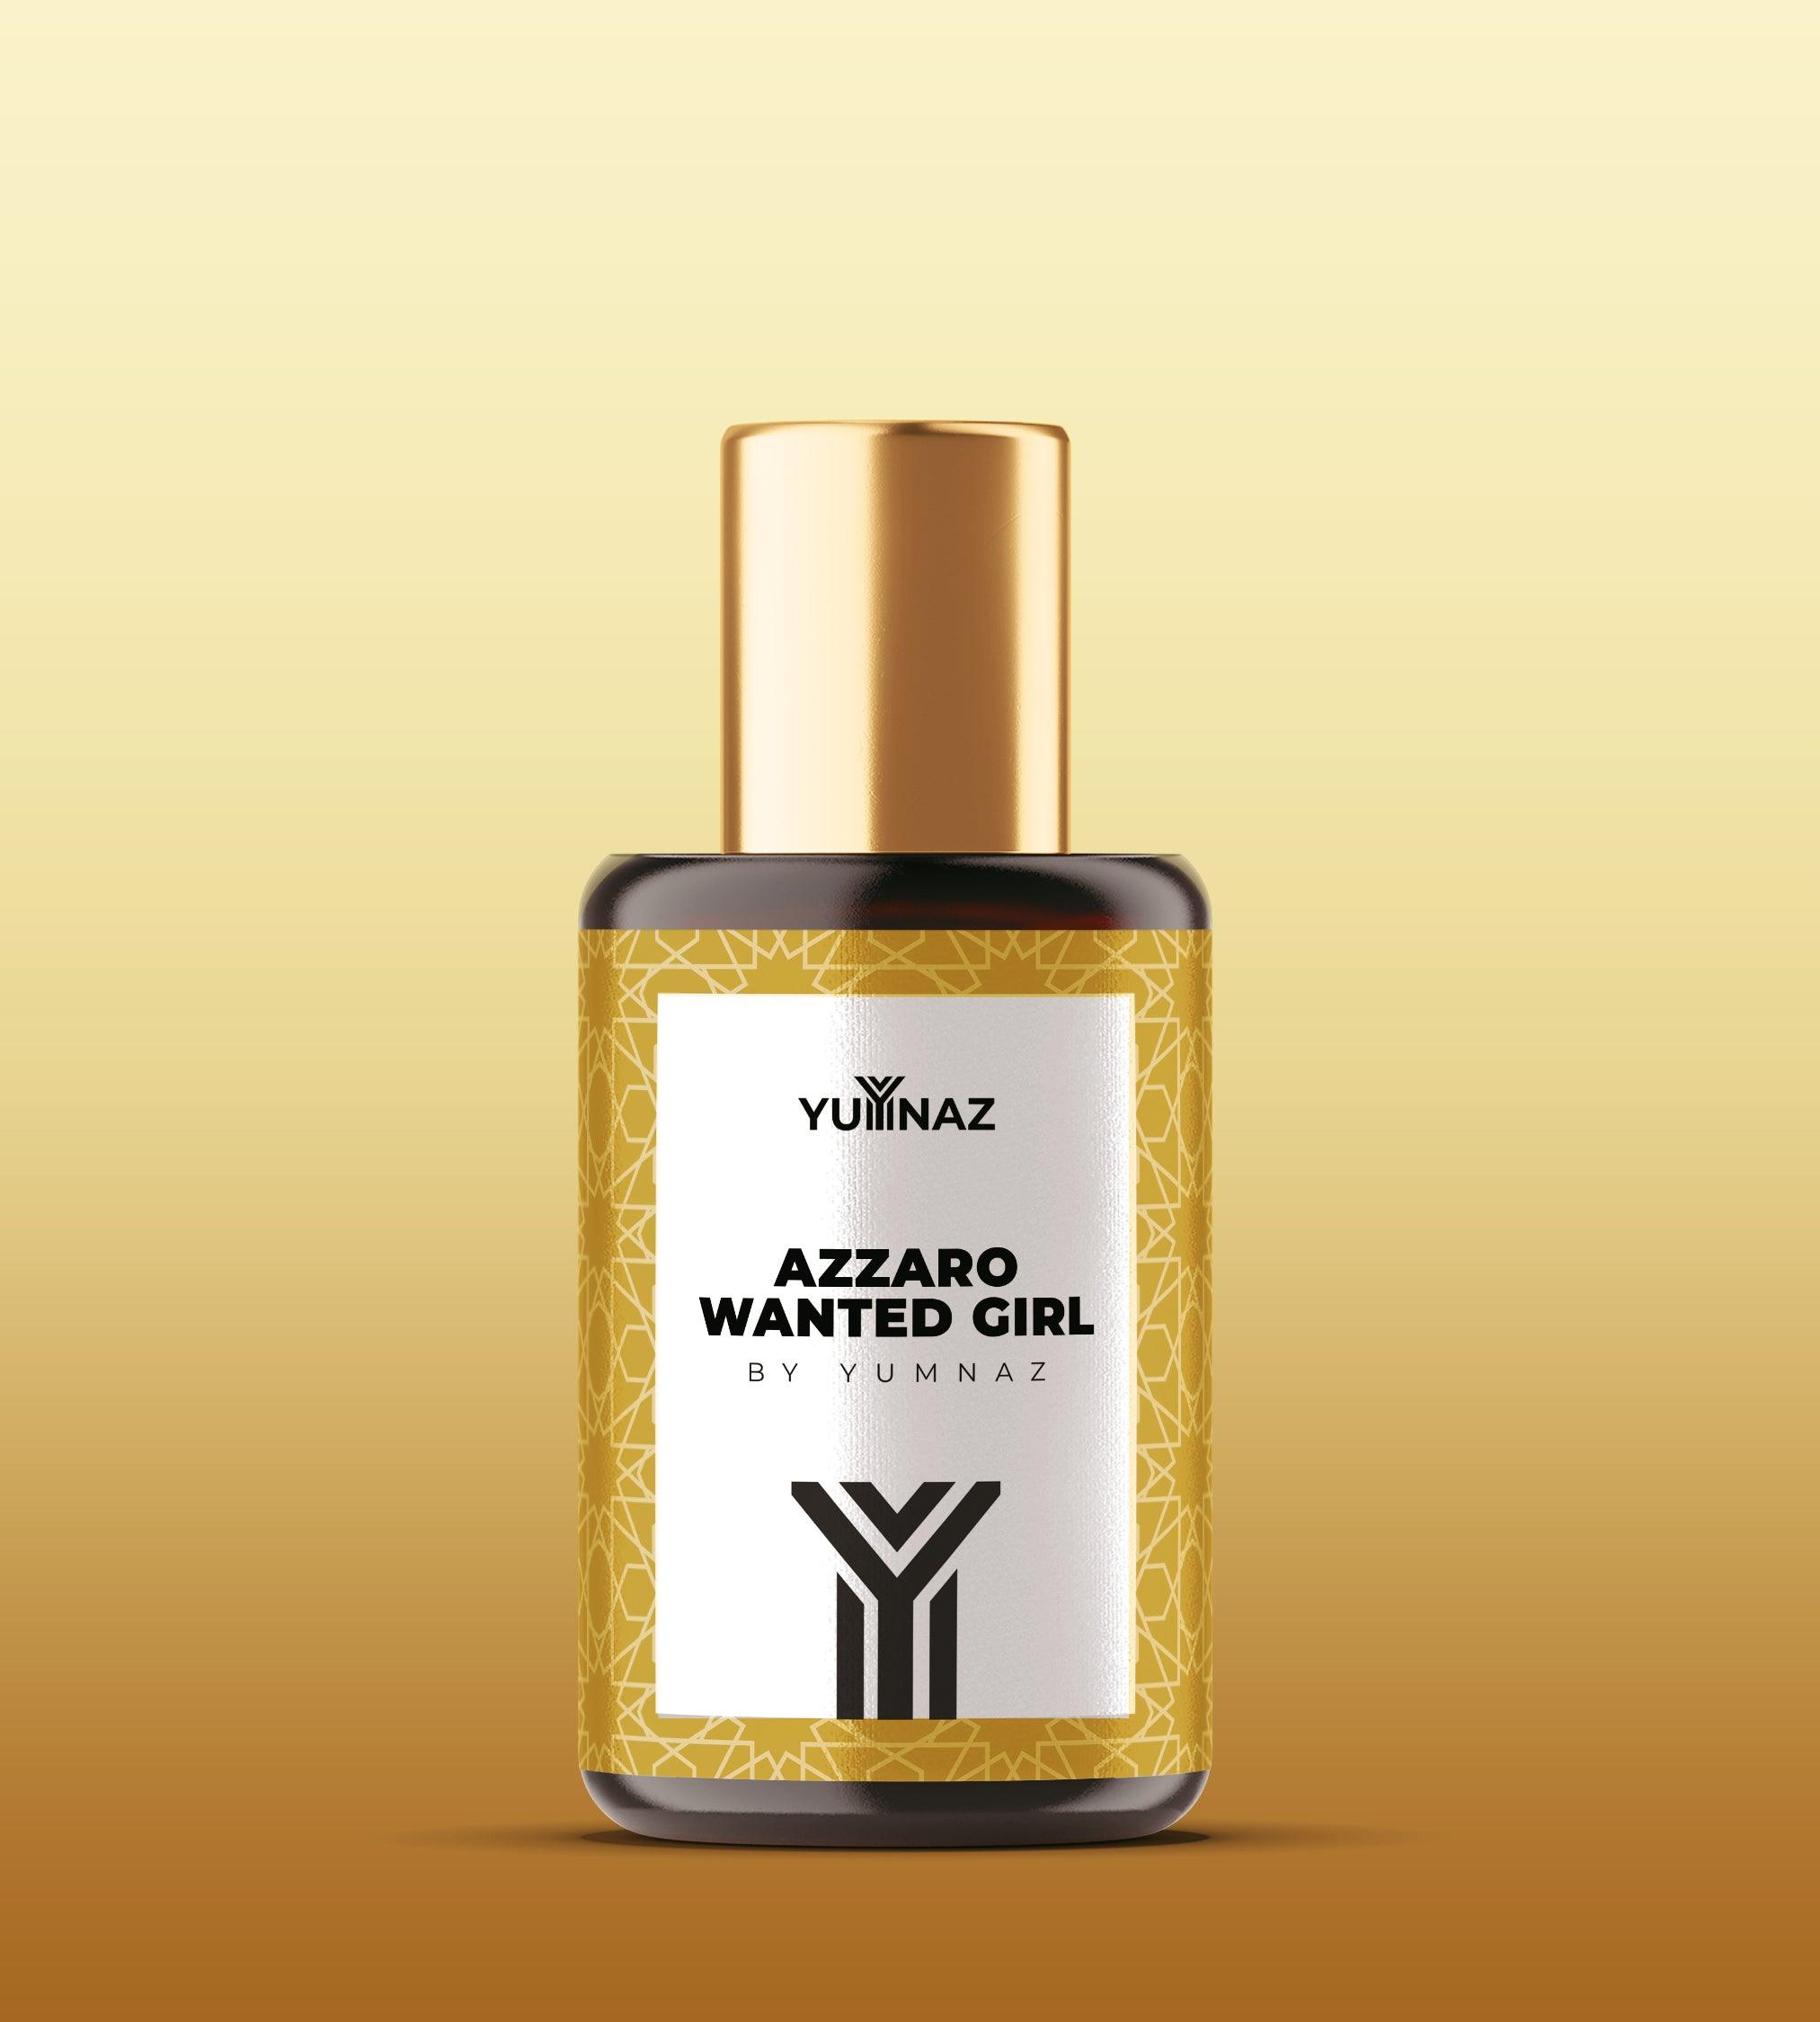 Get the Azzaro Wanted Girl Perfume on a reasonable Price in Pakistan - yumnaz